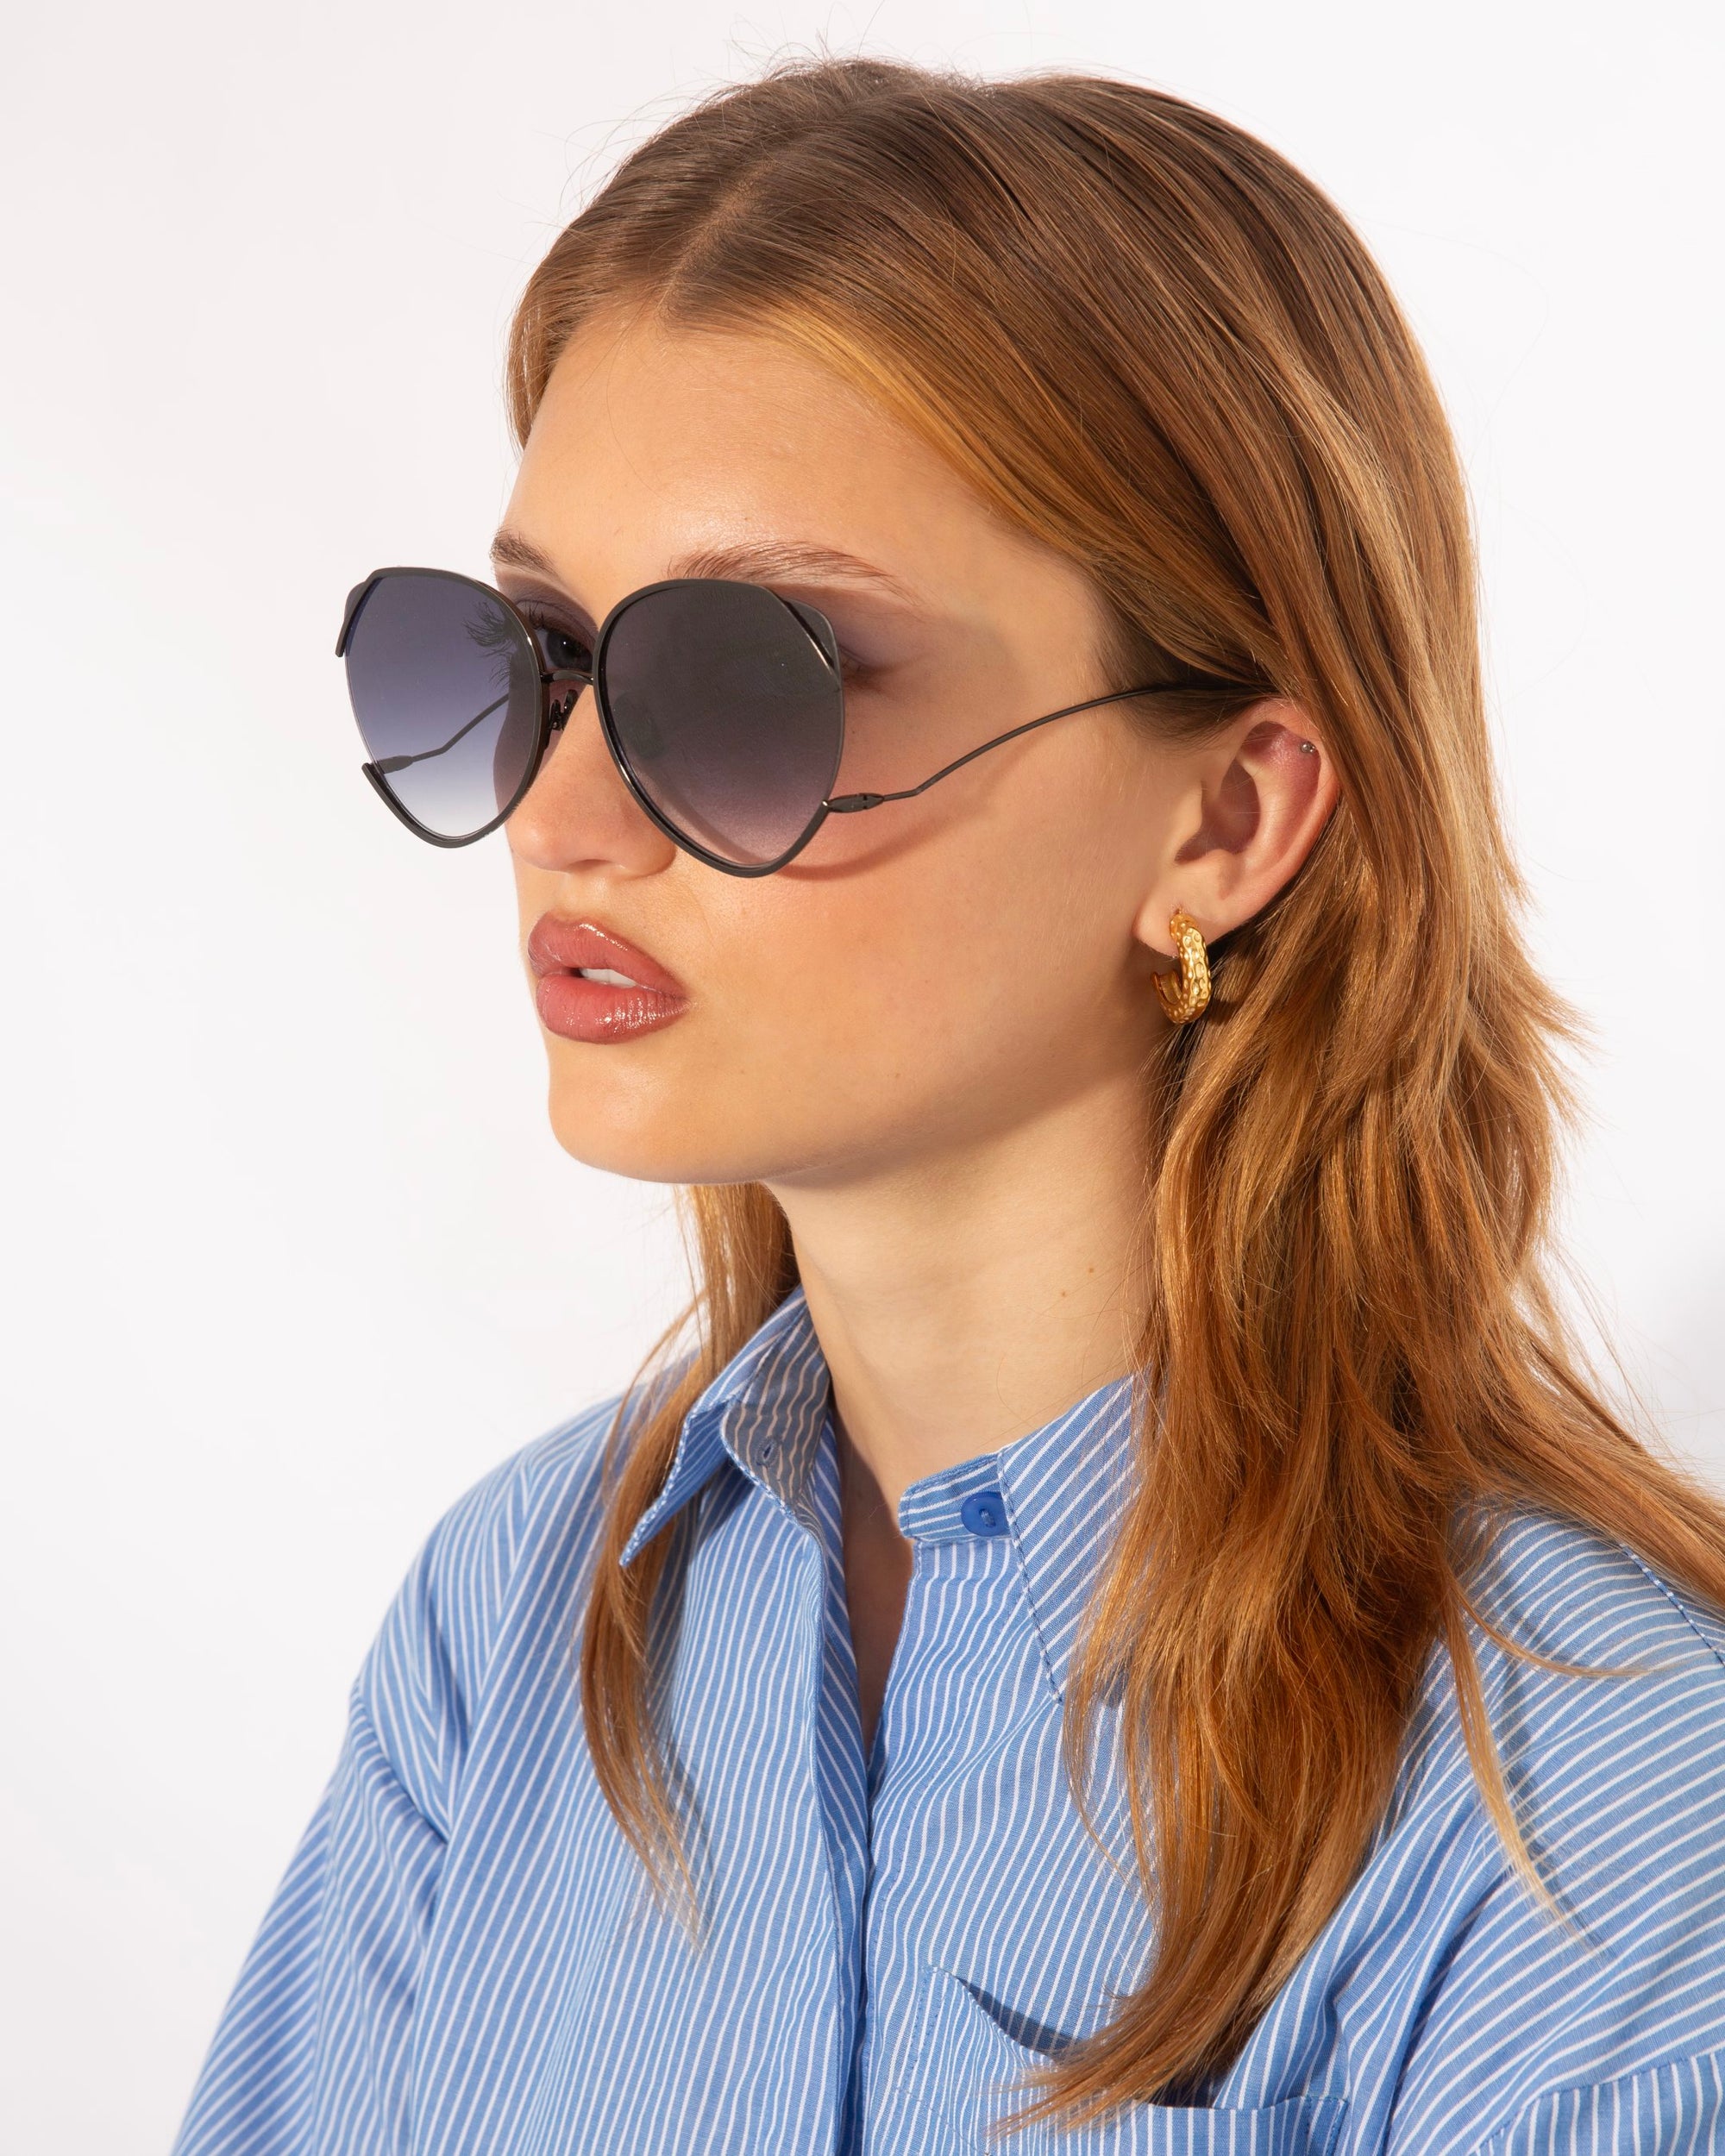 A person with long, straight, reddish hair is wearing oversized For Art's Sake® Wonderland sunglasses with 100% UV protection and a blue and white striped shirt. They also have gold hoop earrings and a serious expression, standing against a plain, white background.